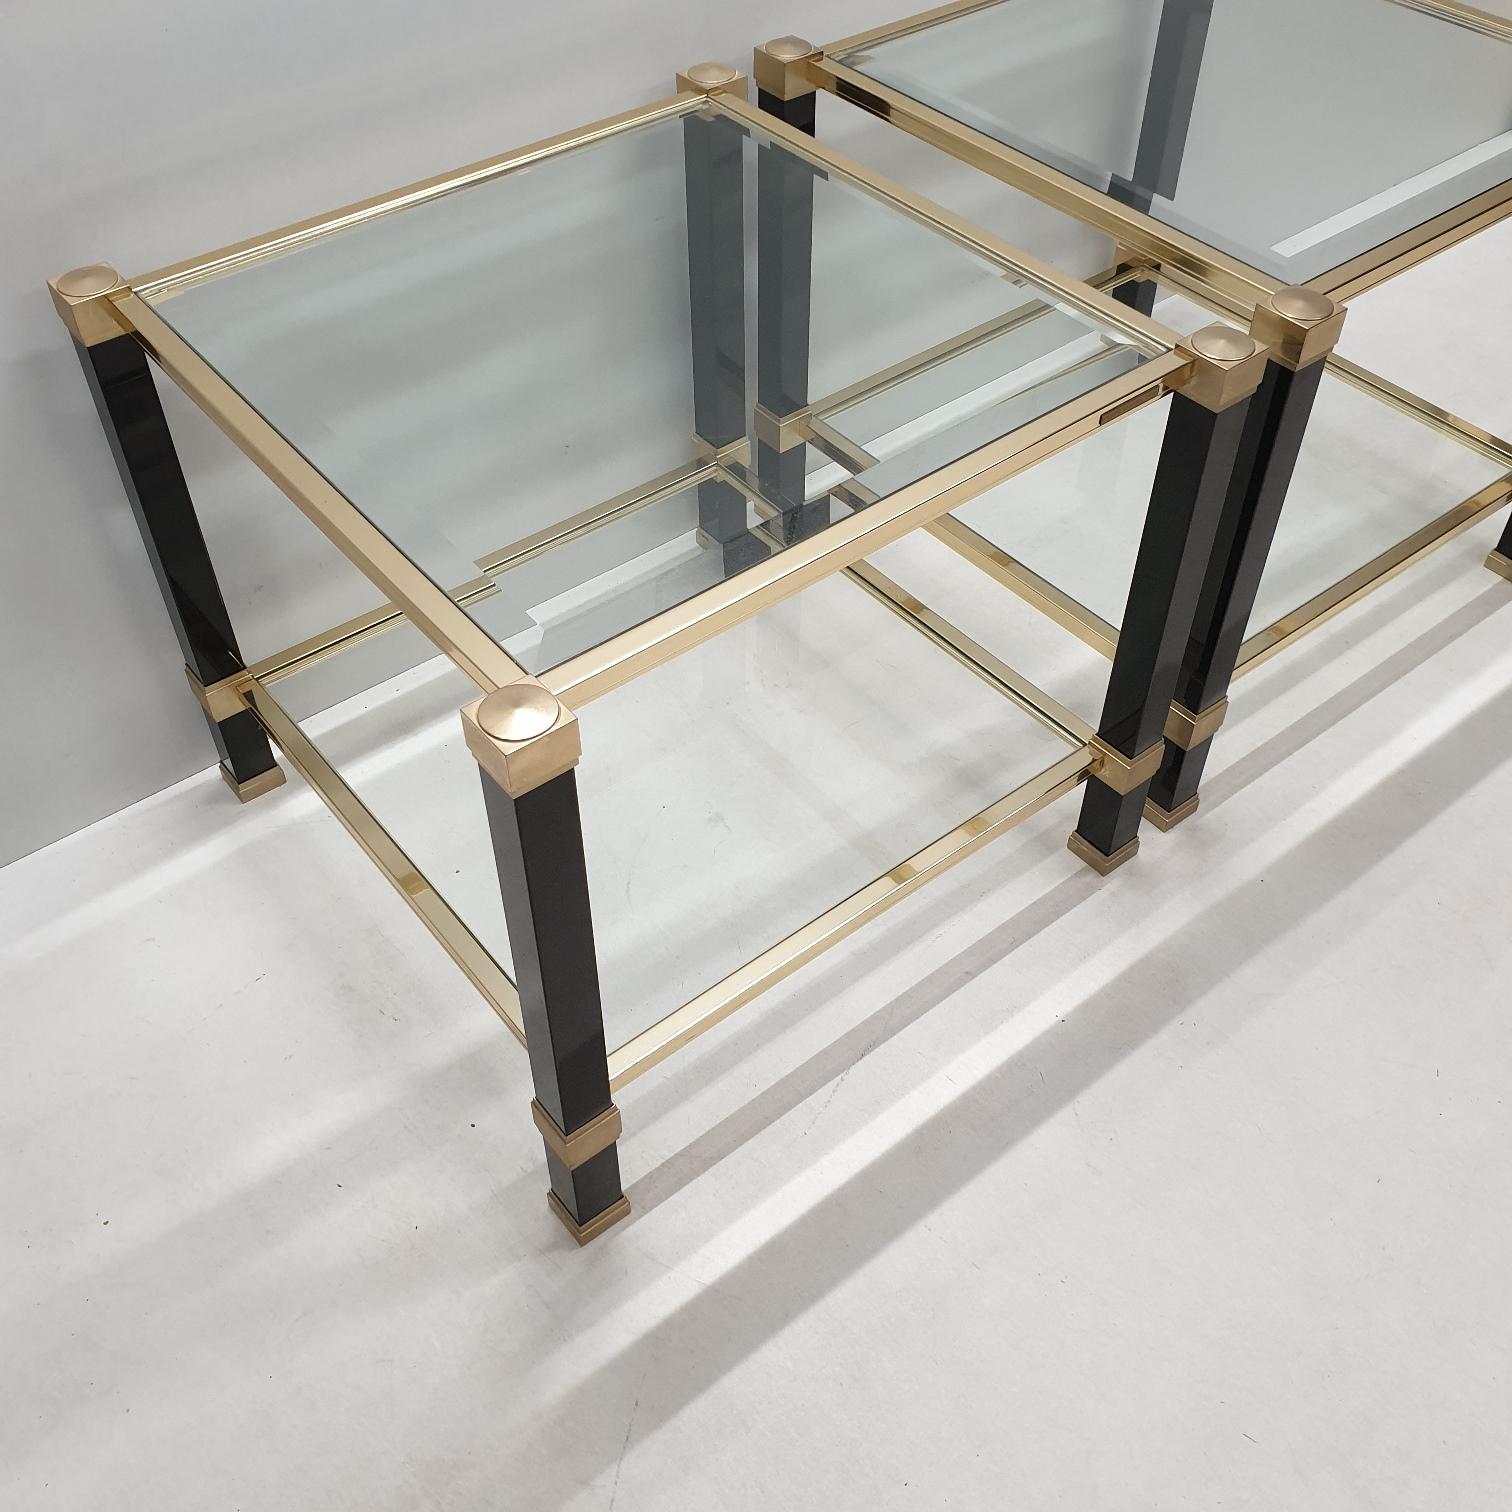 20th Century Pair of Brass 2-Tiers Square Site Tables by Pierre Vandel, 1980s, 1 Set of 2 For Sale